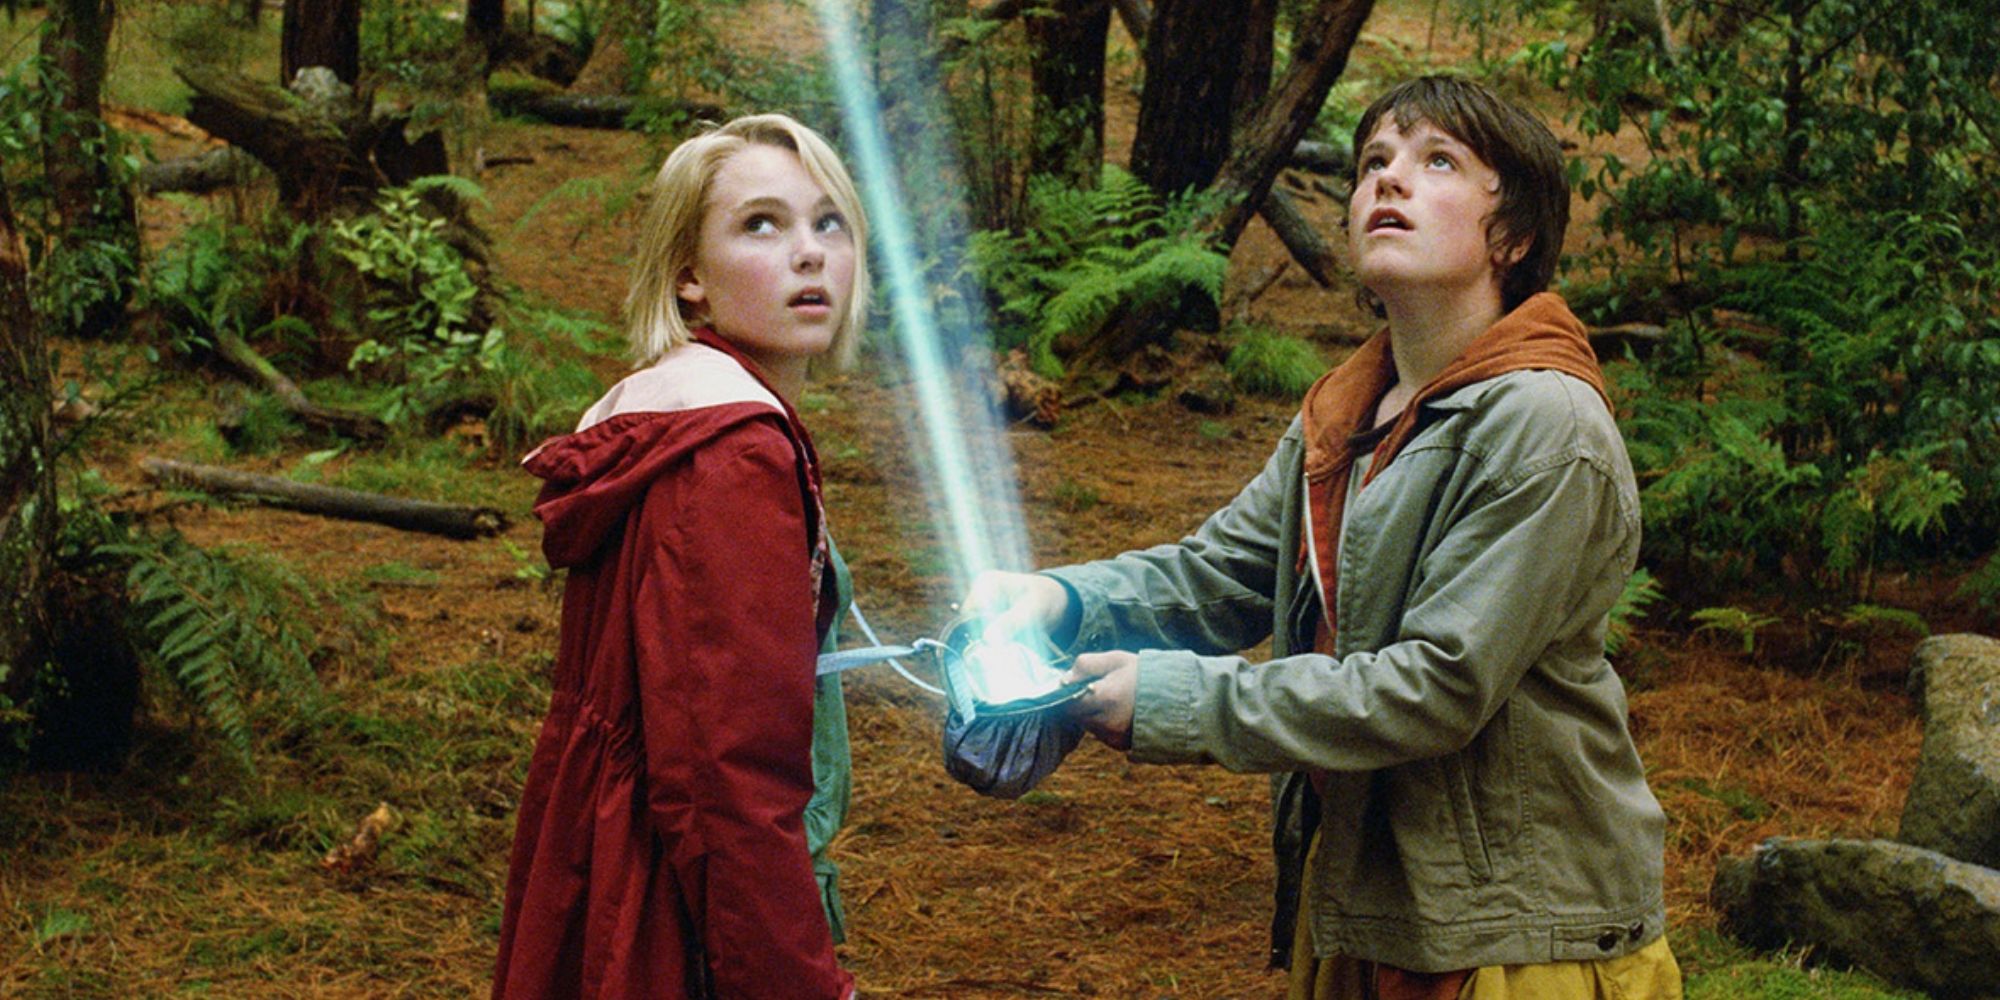 Jess and Leslie in the woods from 'Bridge to Terabithia'